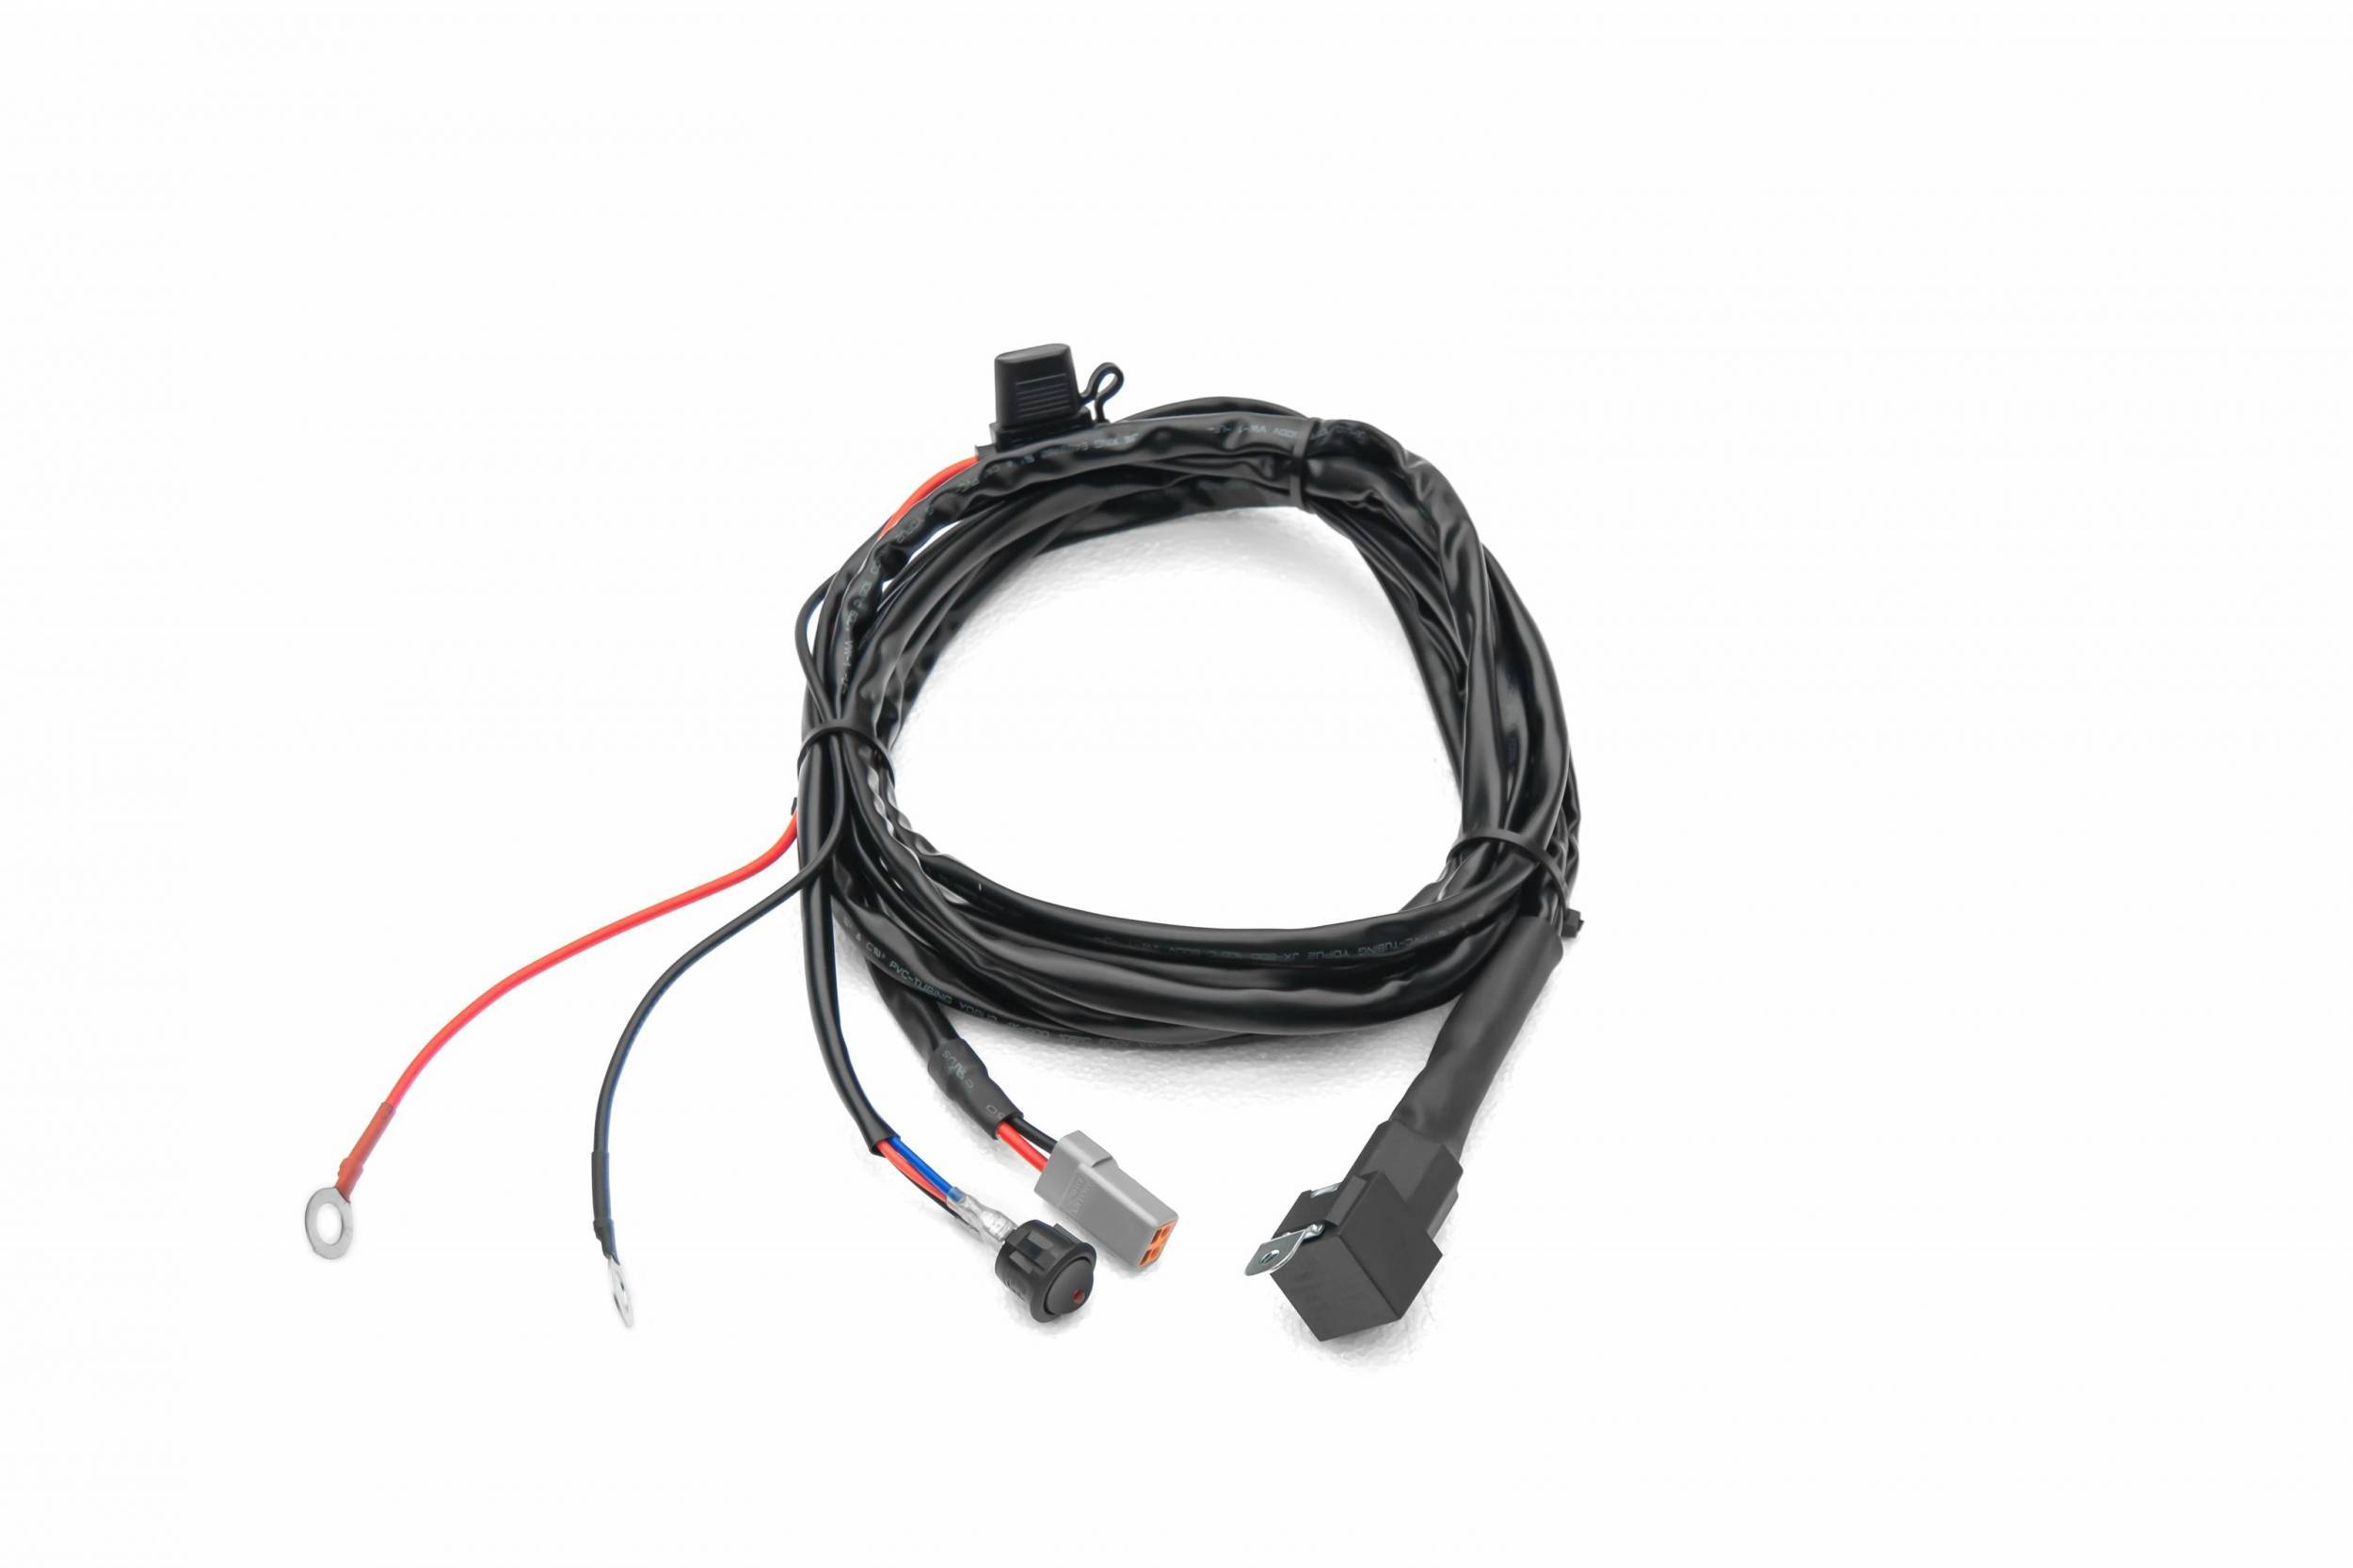 ZROADZ OFF ROAD PRODUCTS - Universal 9 FT DTC Wiring Harness to connect 1 LED Light Bar, 200 Watt or above - Part # Z390020S-B